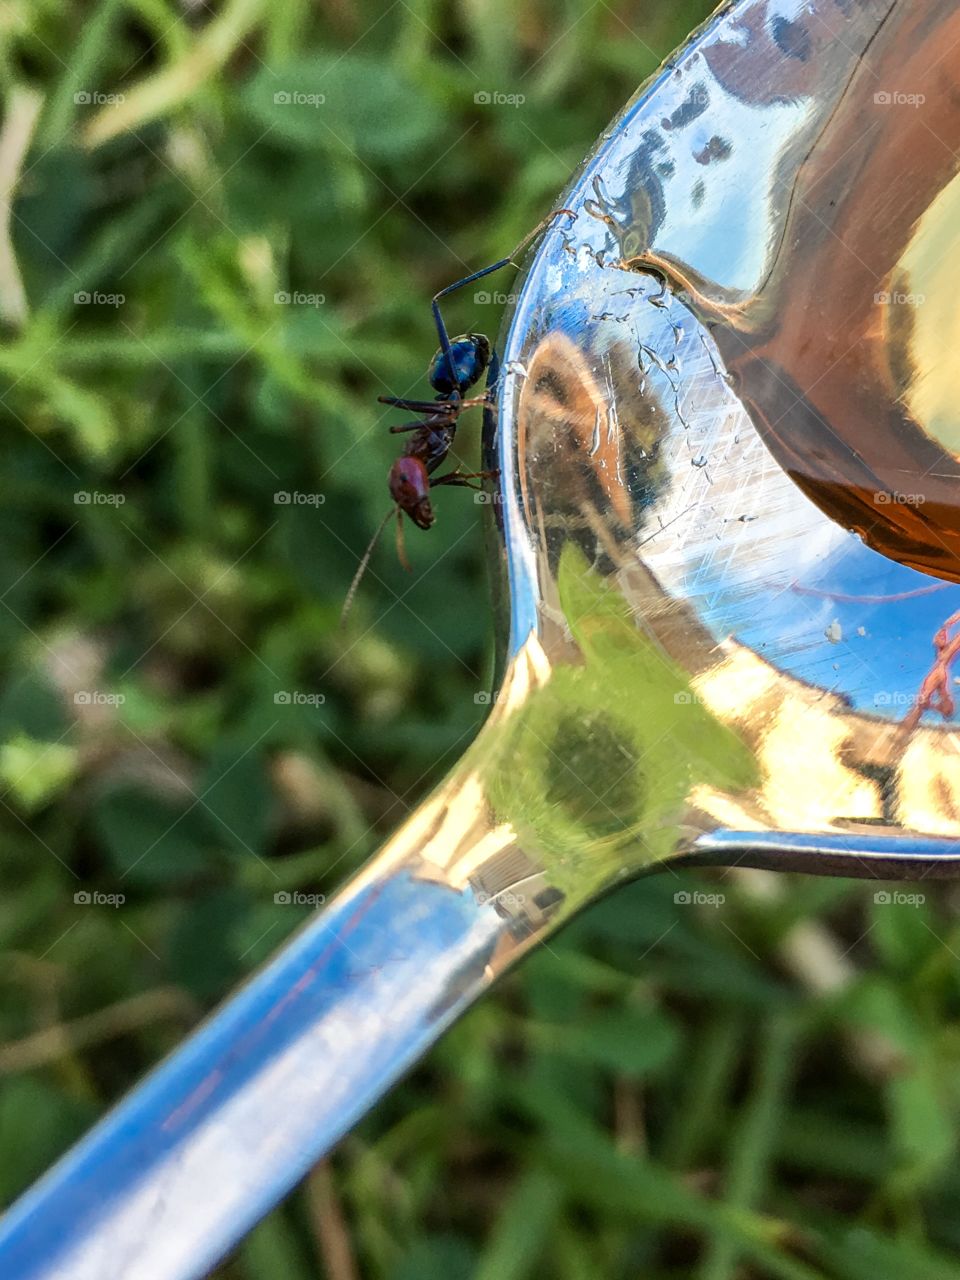 Worker ant on edge of silver spoon reflecting sky